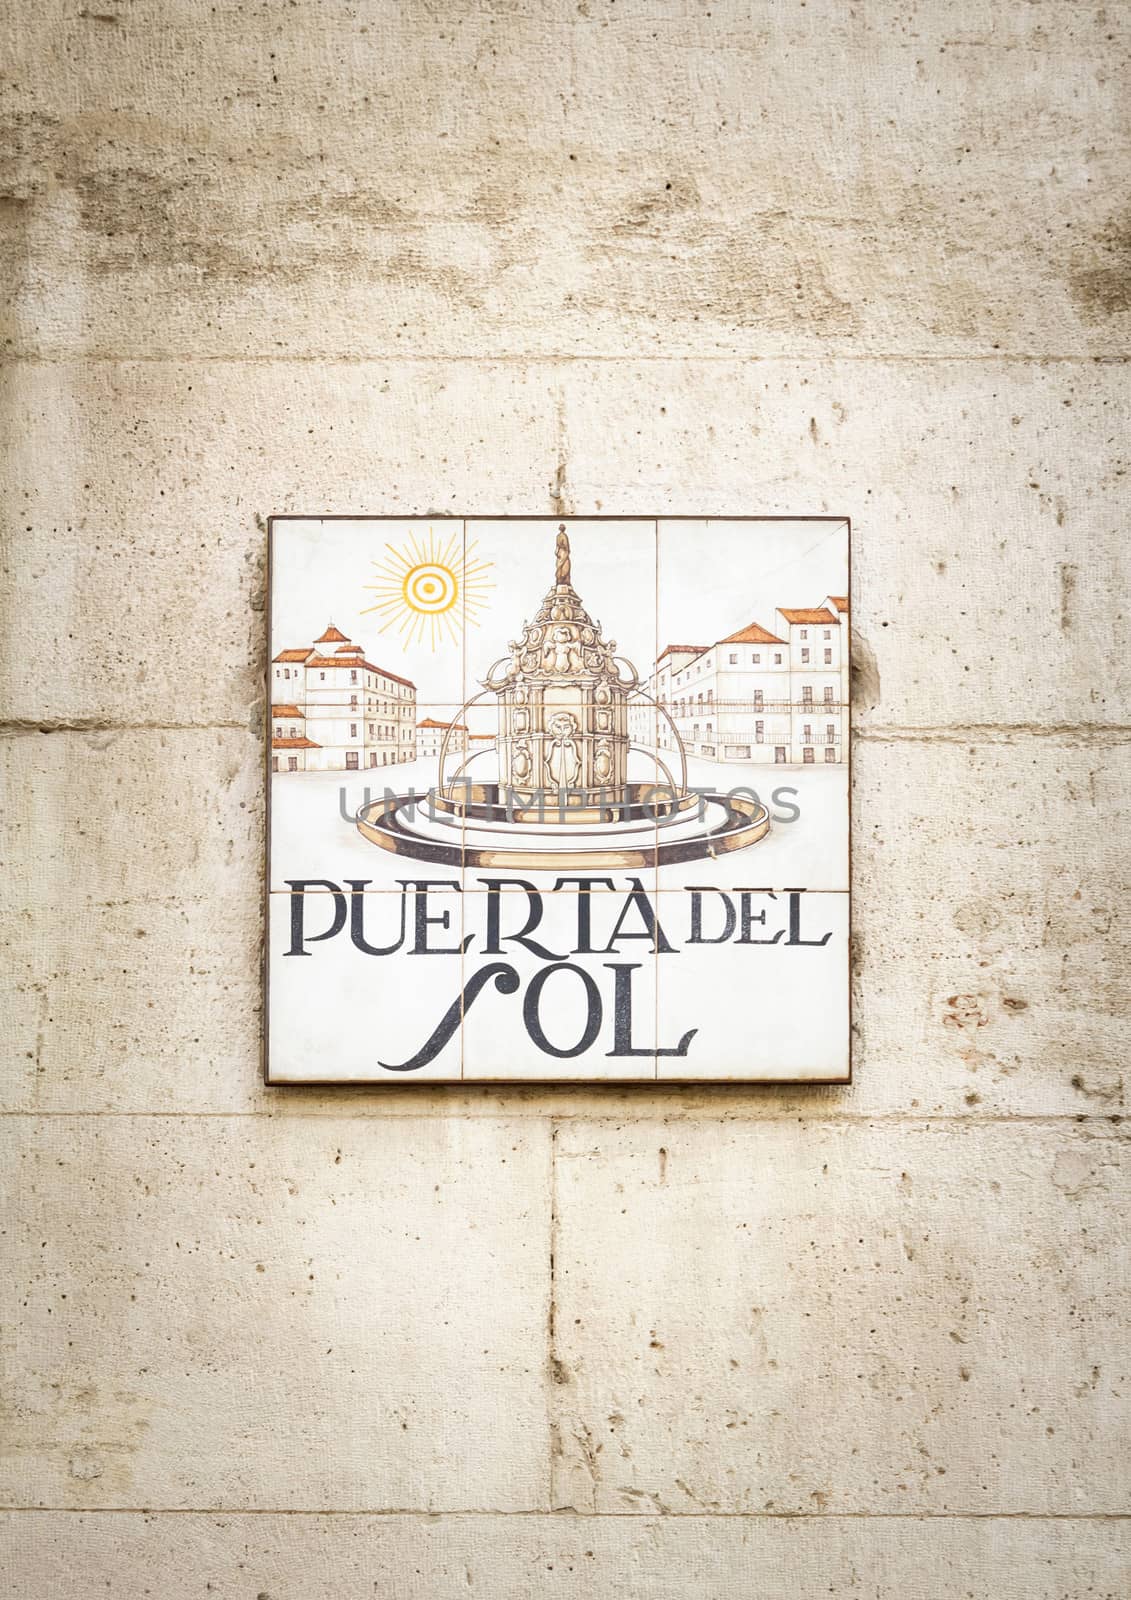 Puerta del Sol sign in Madrid, Spain by doble.d